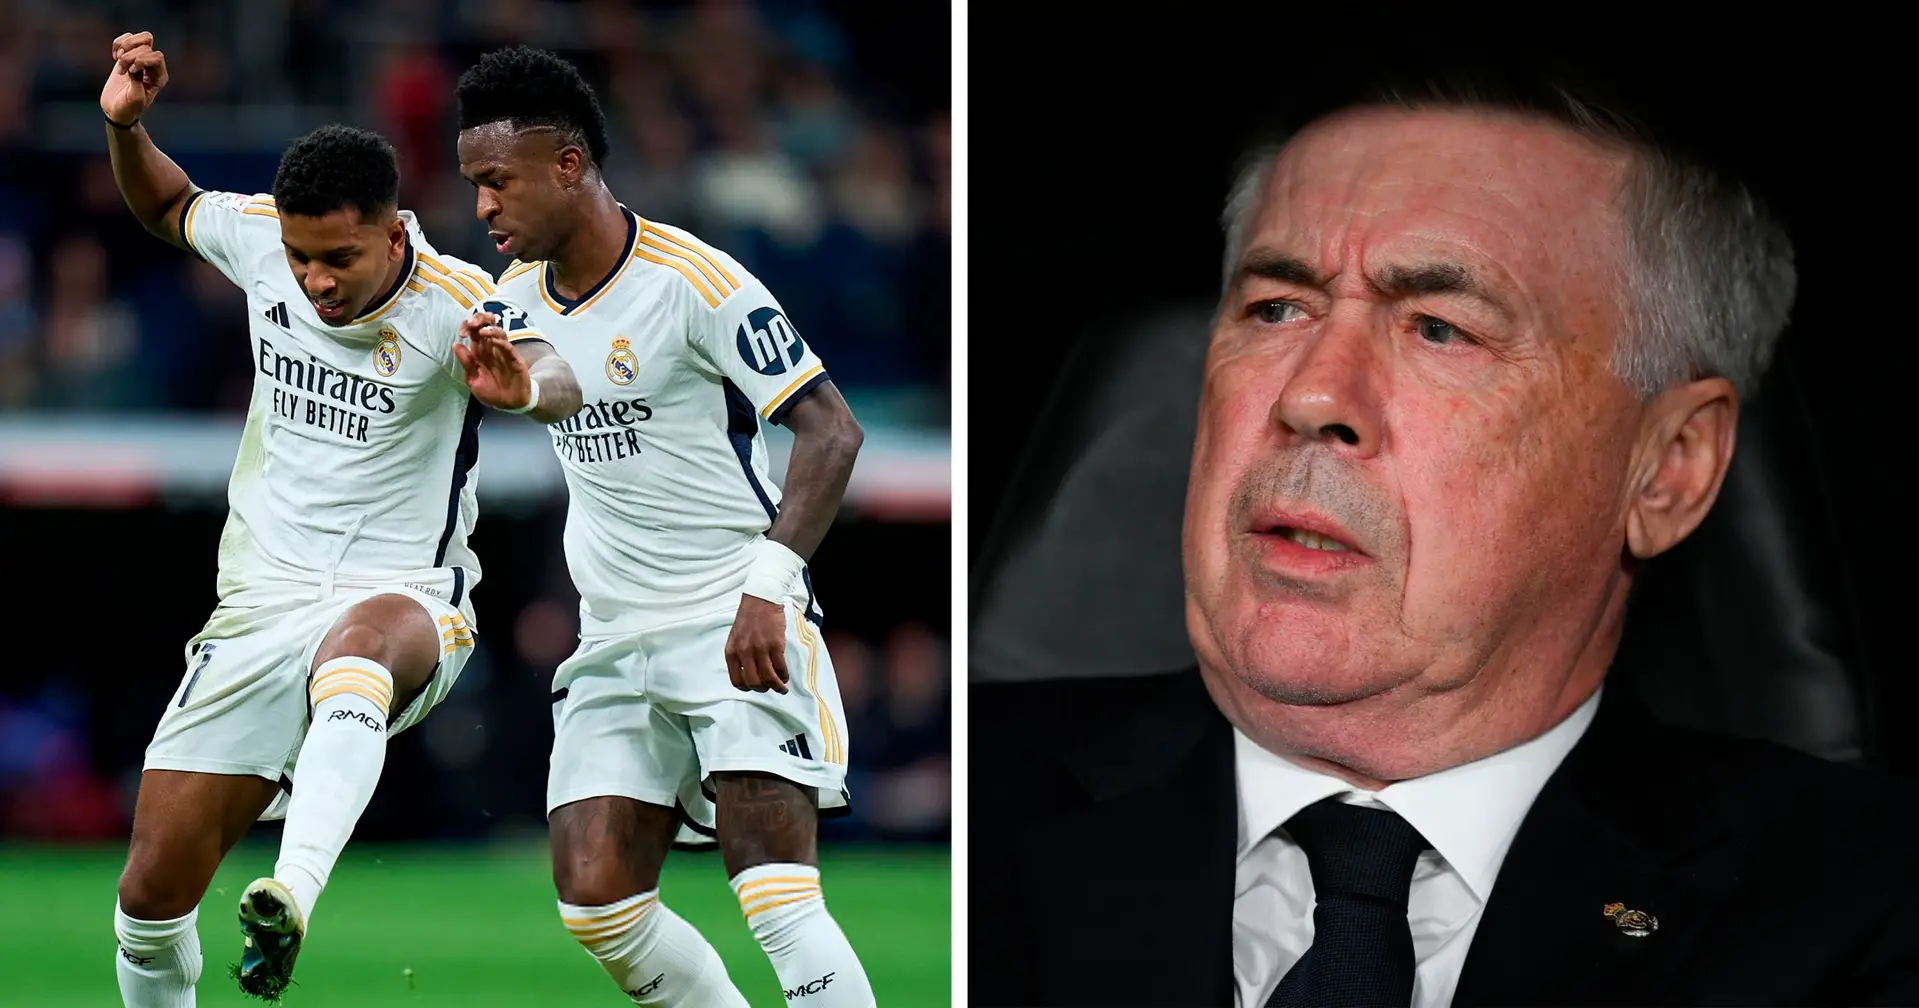 Real Madrid fan explains what the team might lack - we can dominate Man City if we do THIS